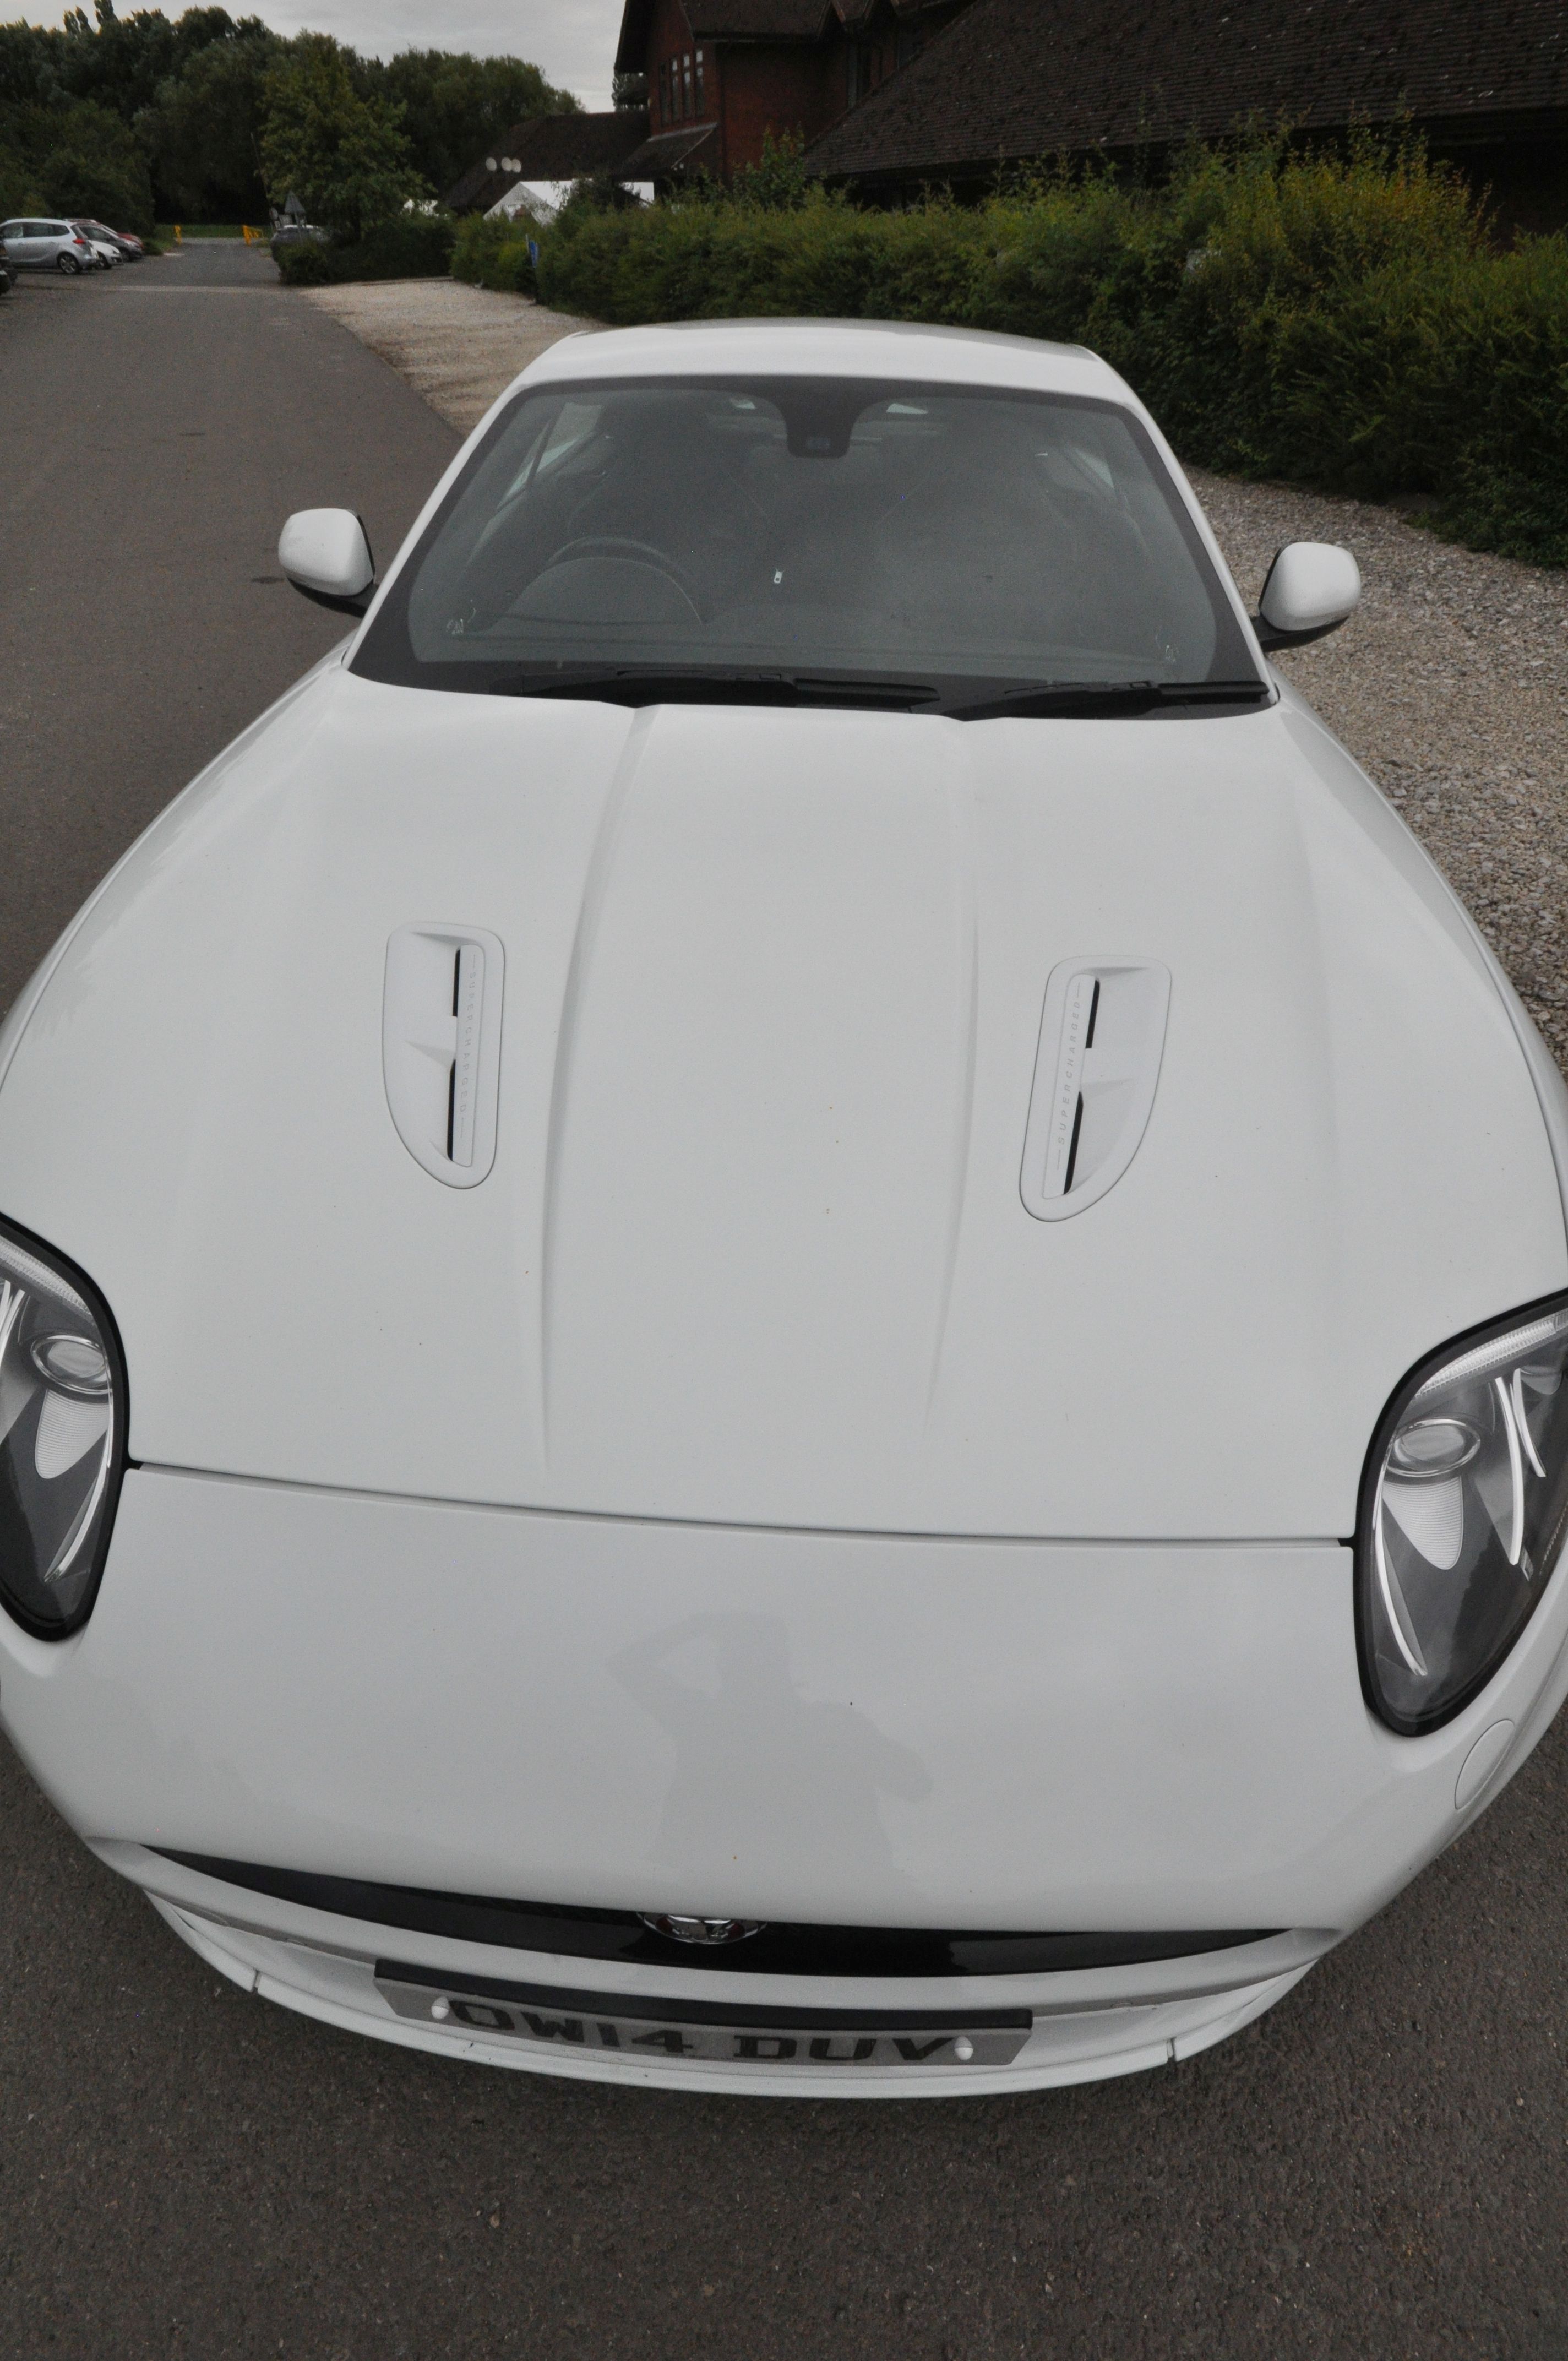 A 2014 JAGUAR XK DYNAMIC R AUTO COUPE - OW14 DUV - This vehicle was first registered in July 2014. A - Image 5 of 11